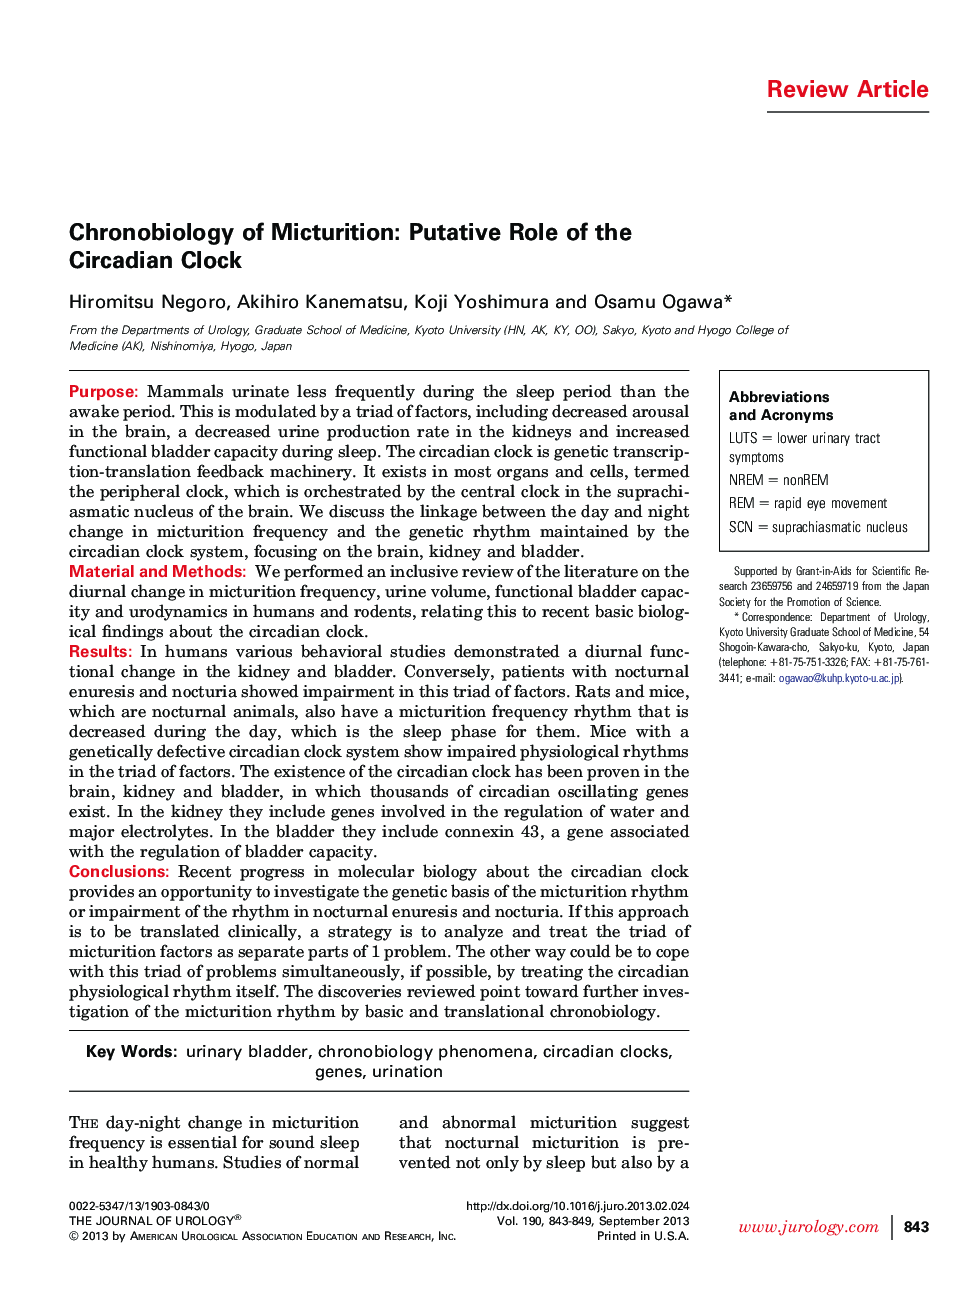 Chronobiology of Micturition: Putative Role of the Circadian Clock 